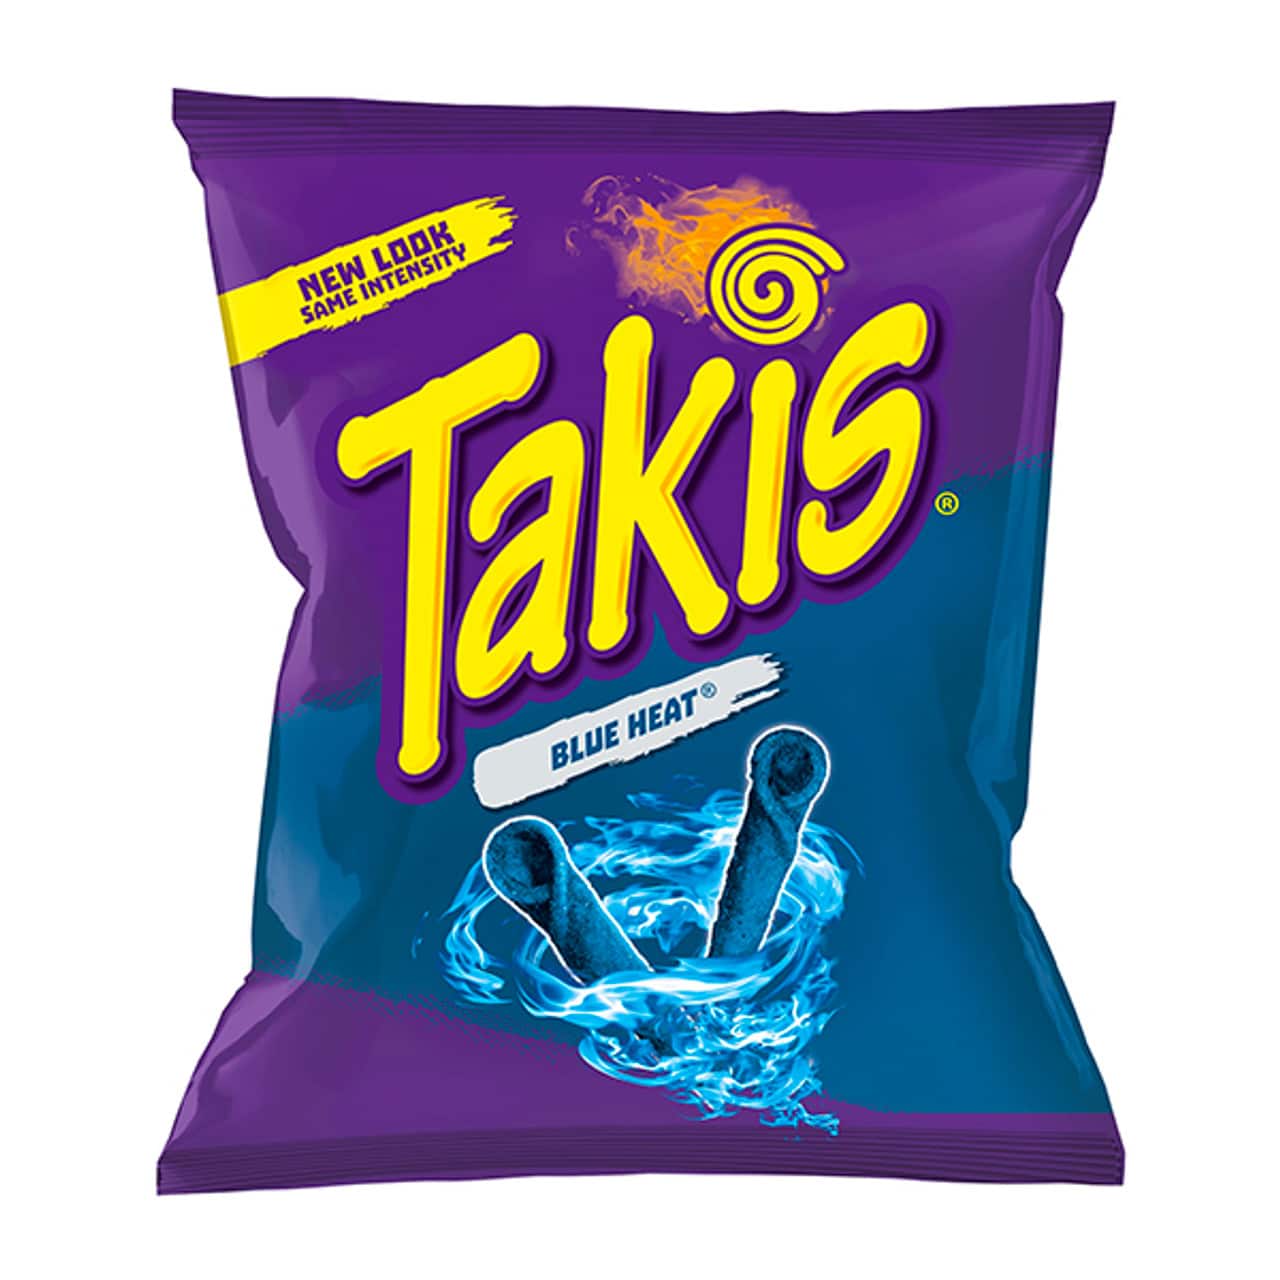 Can You Eat Takis While Pregnant?